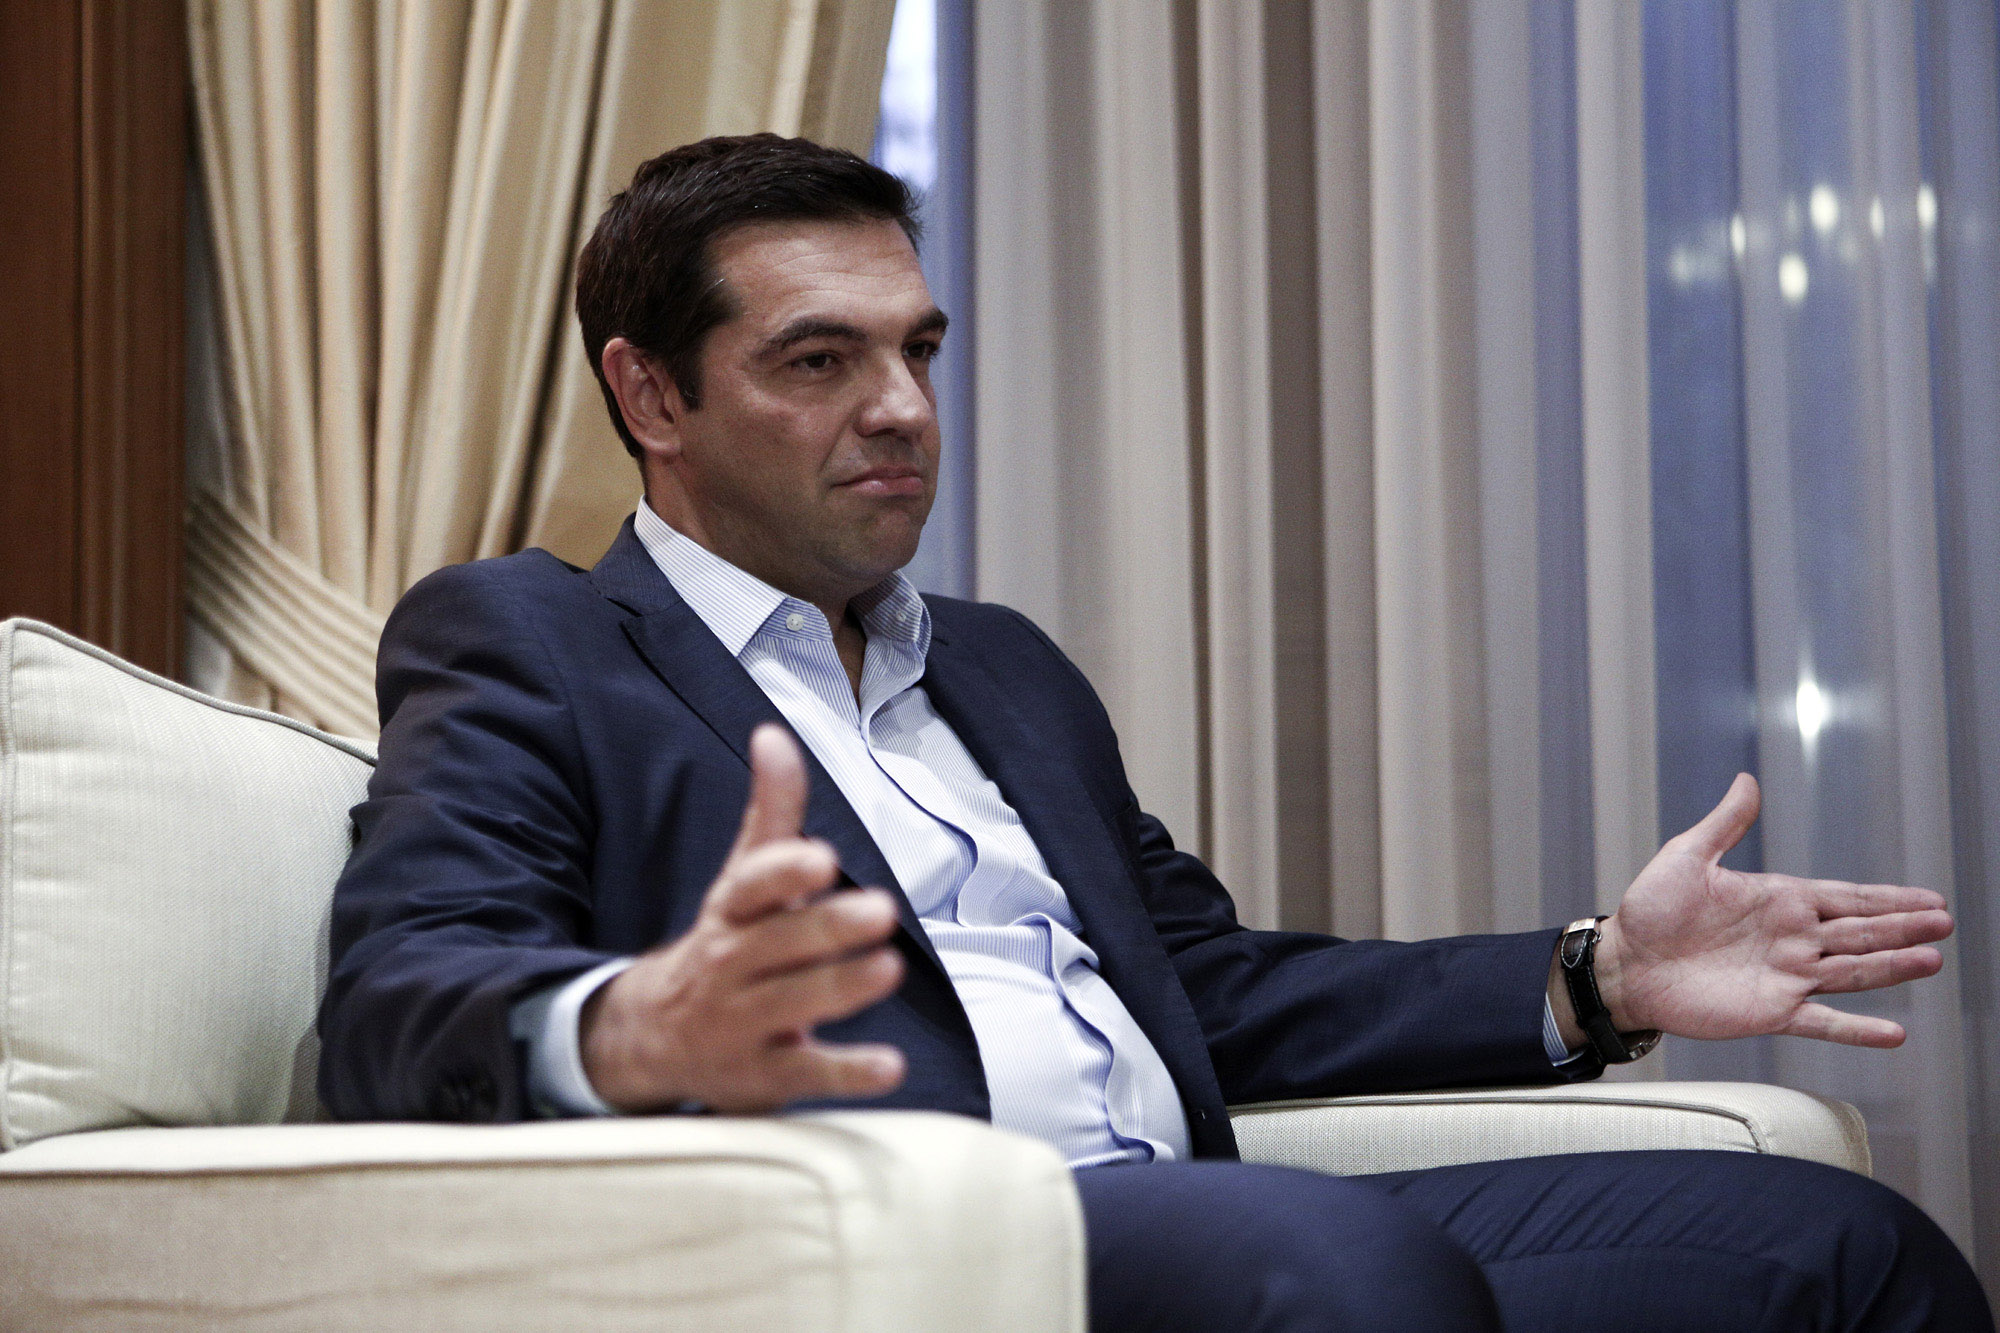 Hand in Ceremony at Maximos Mansion with Alexis Tsipras giving over the office to the first female prime minister, Vasiliki Thanou, on Aug. 27, 2015 / Τελετή παράδοσης παραλαβής στο Μέγαρο Μαξίμου όπου ο Αλέξης Τσίπρας παρέδωσε στην Βασιλική Θάνου, στις 27 Αυγούστου, 2015